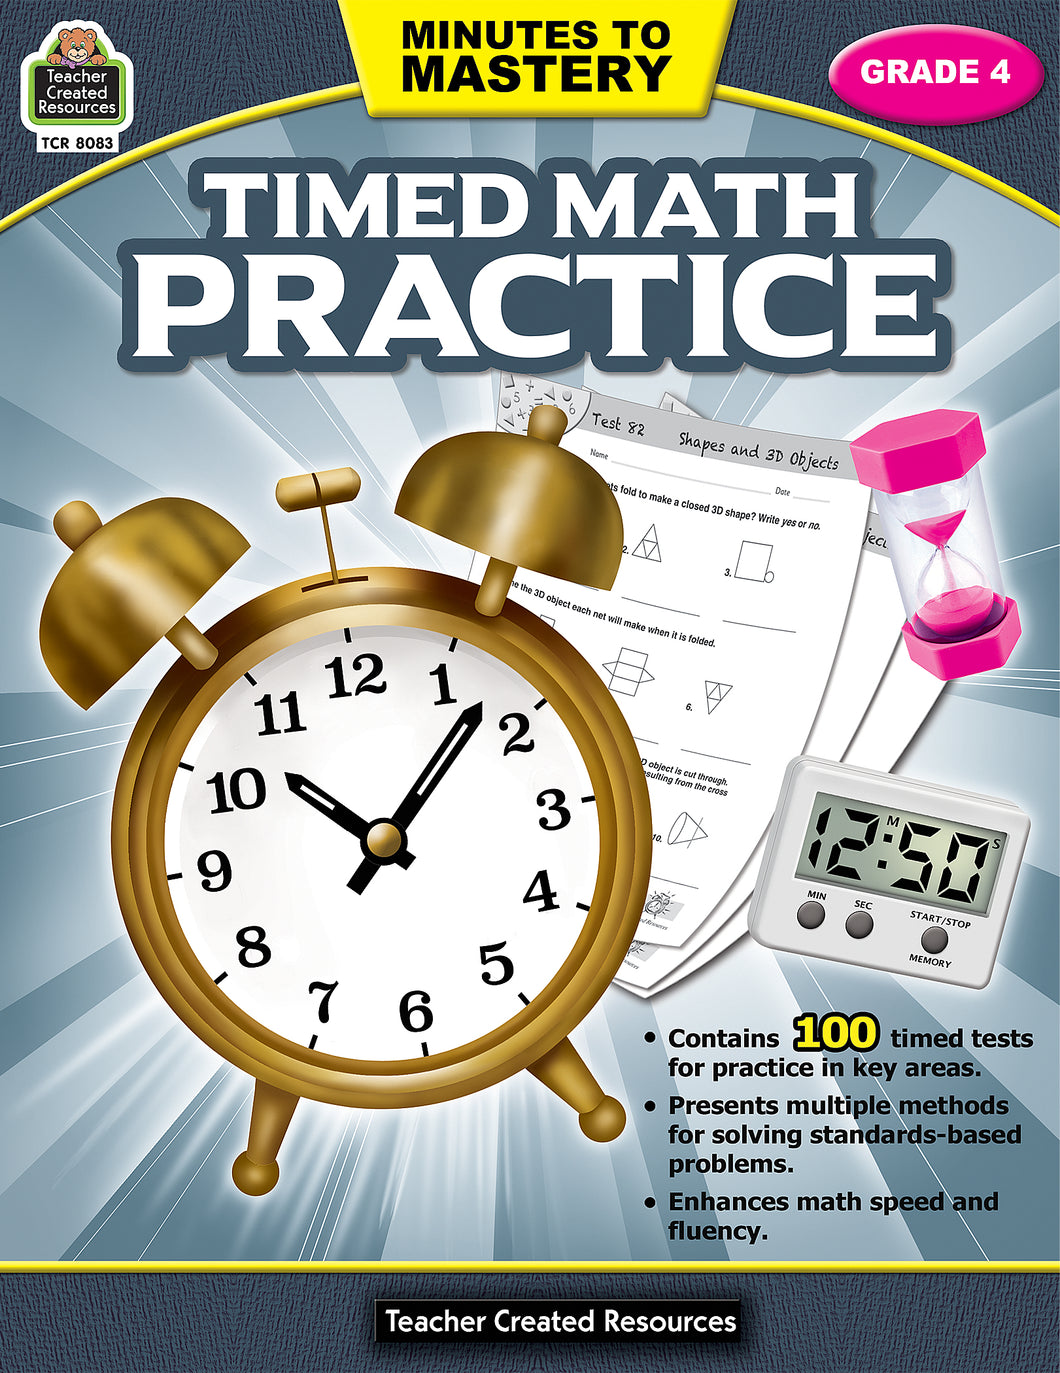 Minutes to Mastery- Timed Math Practice Grade 4